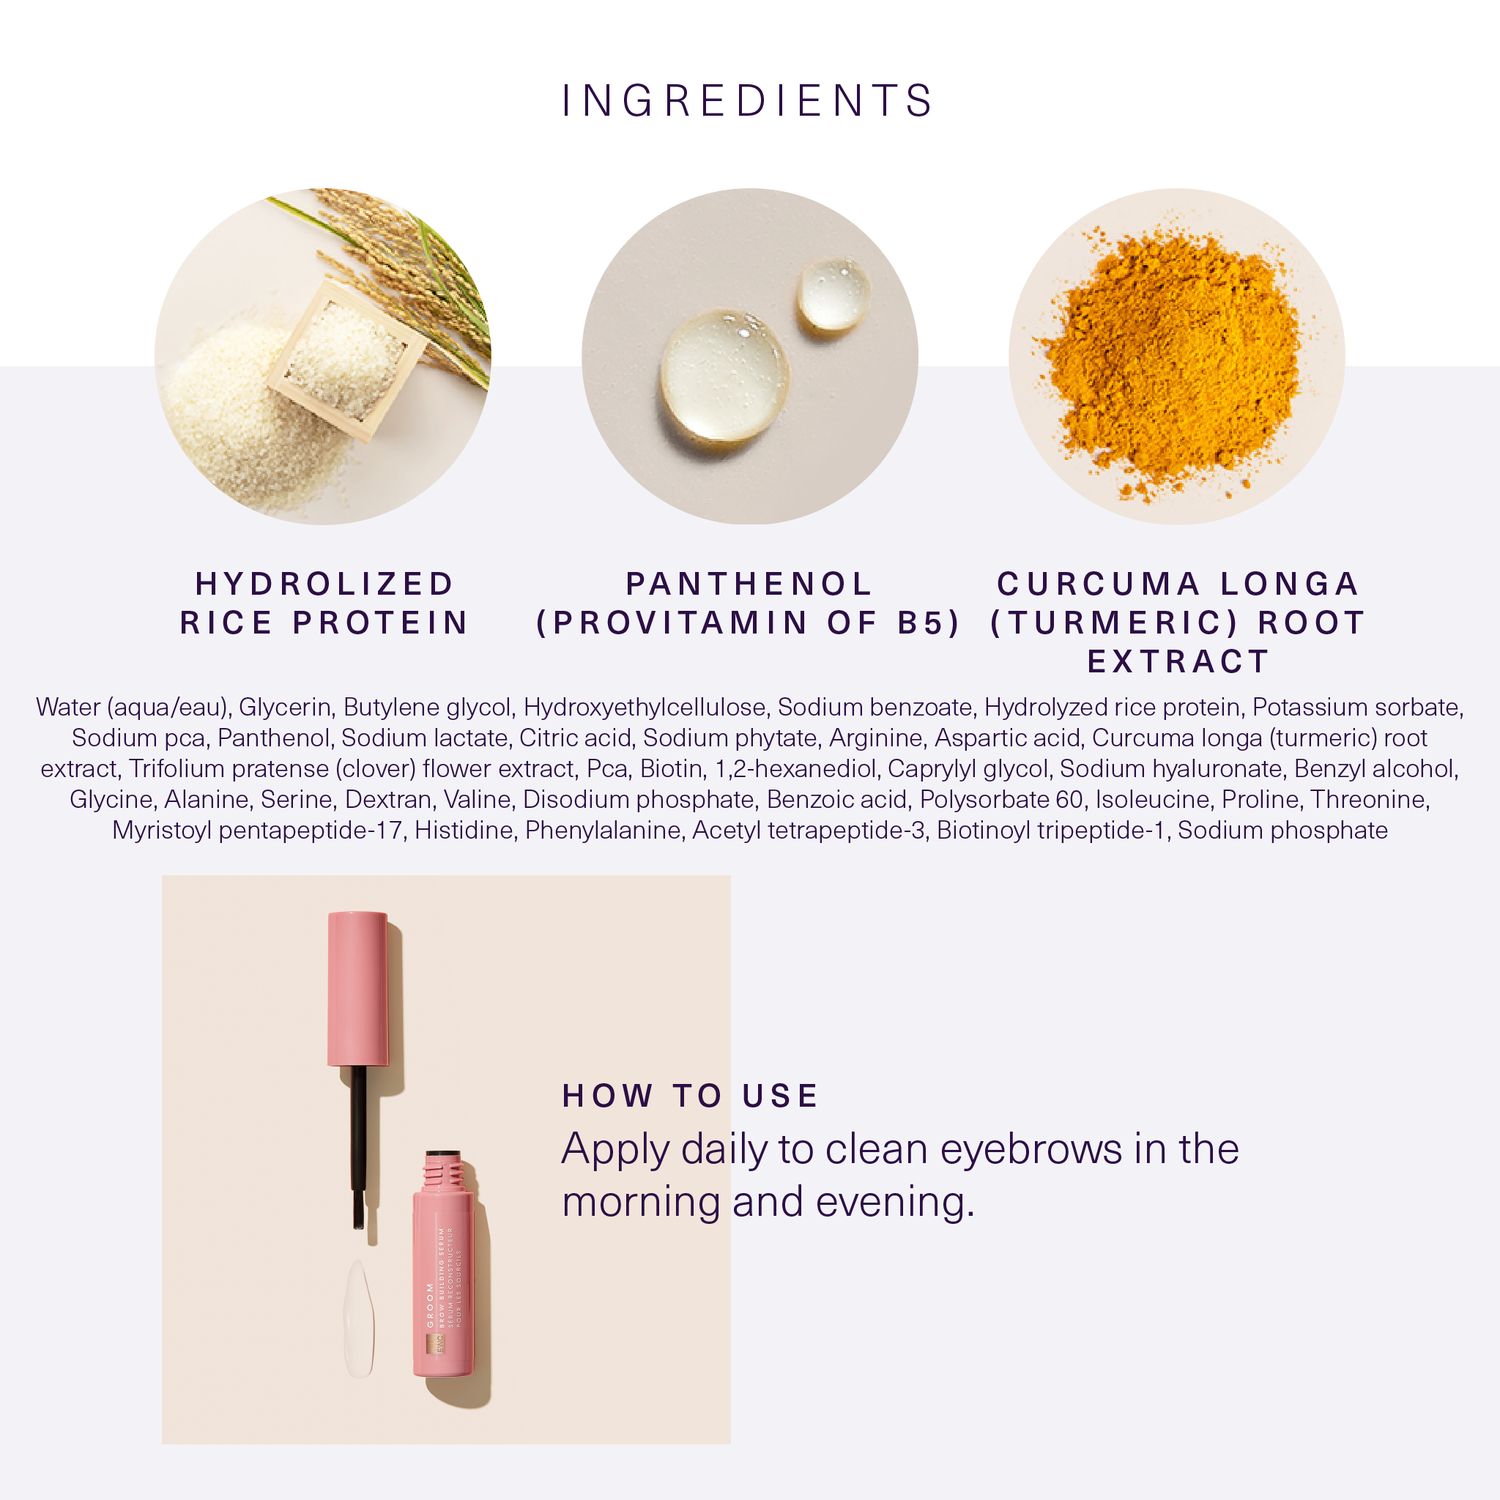 Ingredients and how to use European Wax Center Brow Building Serum with images of hydrolyzed rice protein, panthenol, and curcuma longa (turmeric) extract on white and light gray background